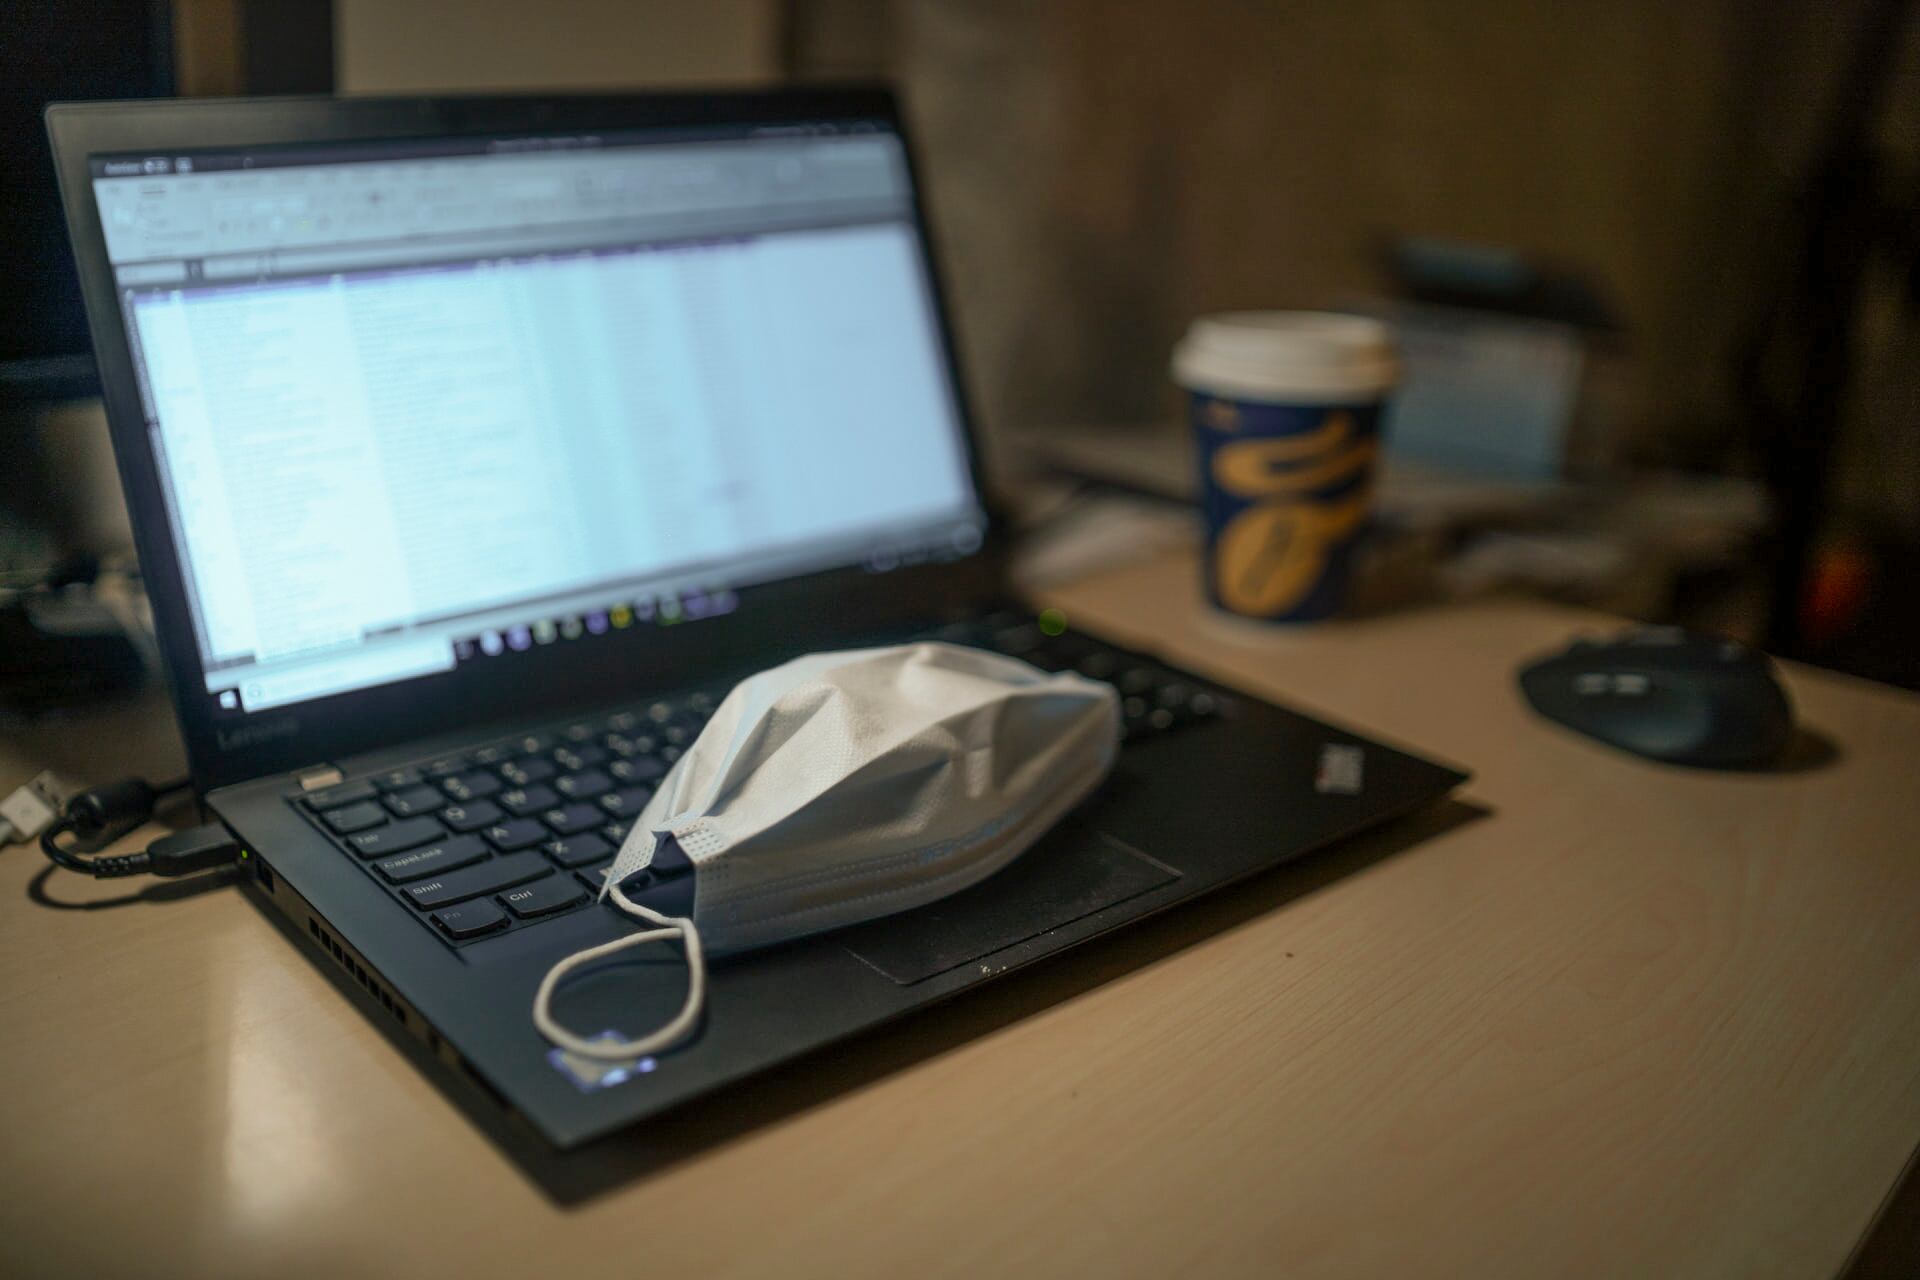 A protective face mask resting on the keyboard of a laptop computer.